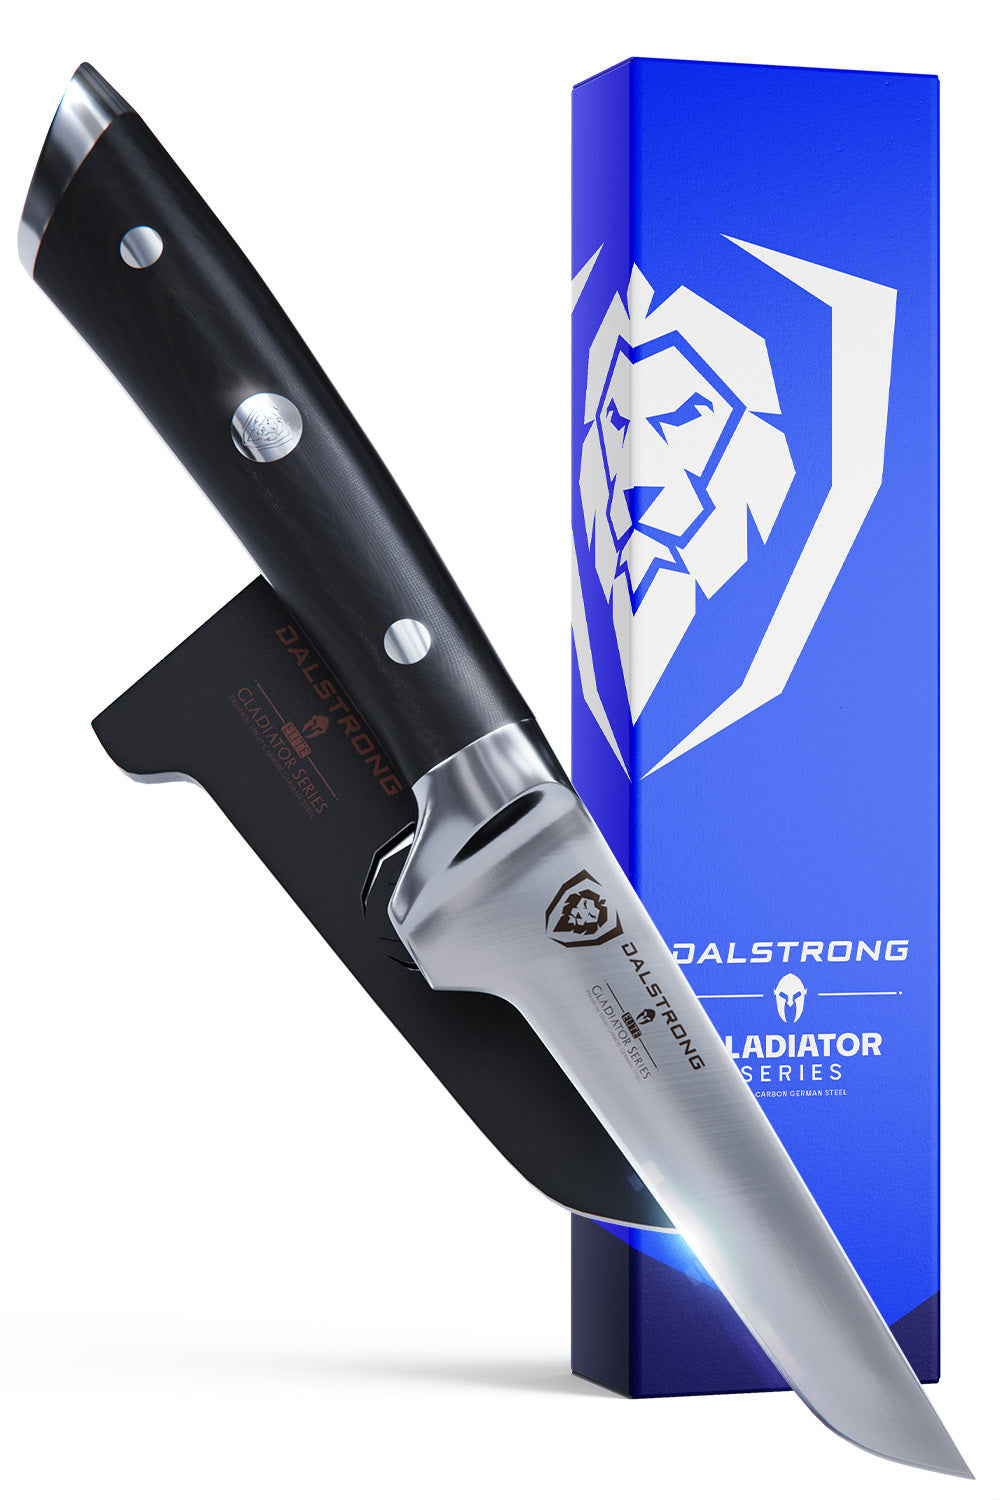 Poultry Boning Knife 3.75" | Gladiator Series | NSF Certified | Dalstrong ©